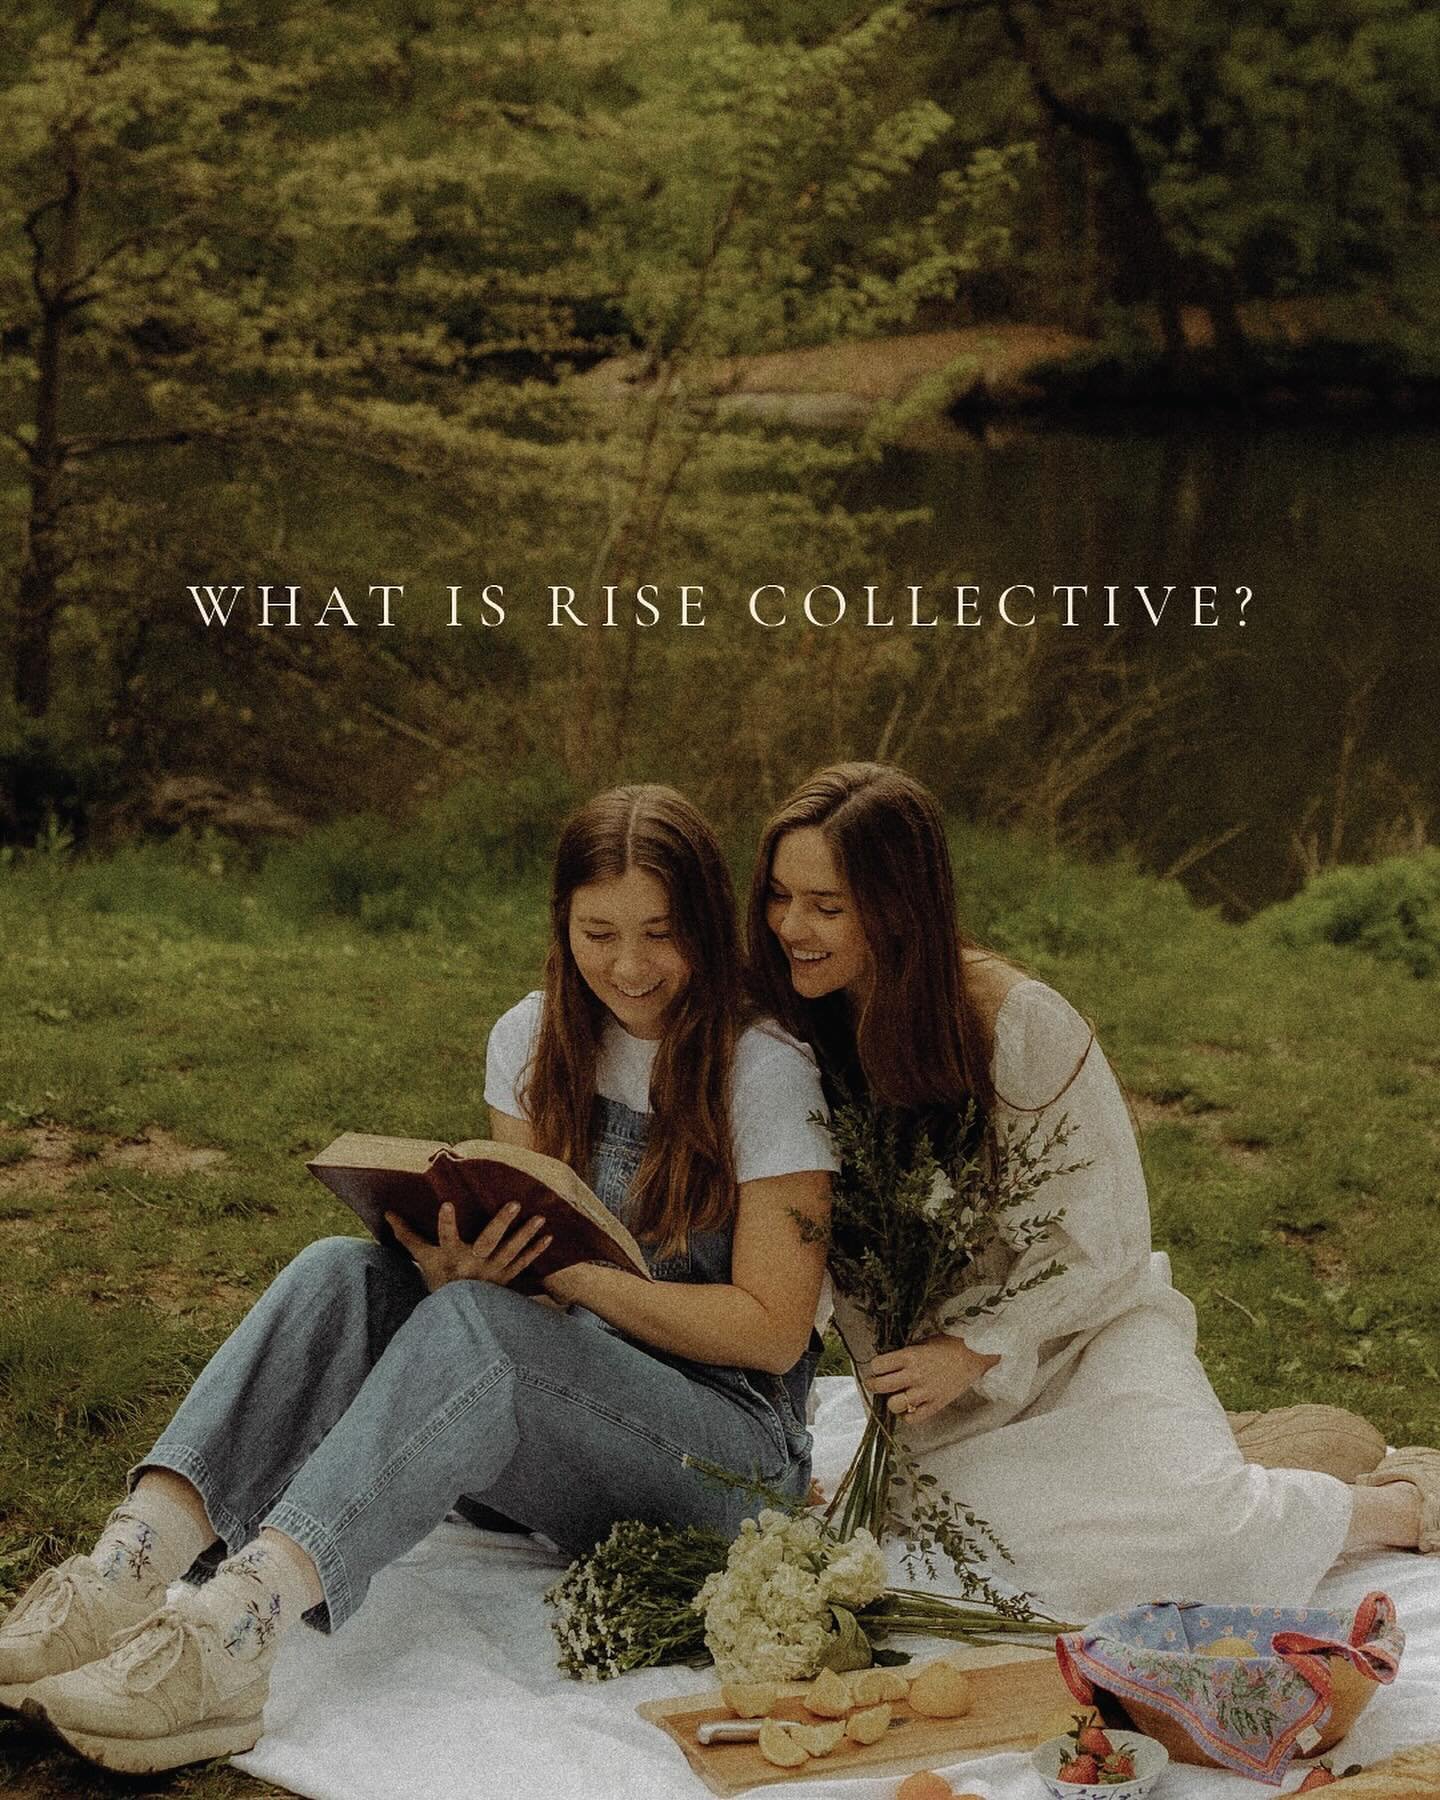 If you&rsquo;re new here, hi!! We&rsquo;re so glad you&rsquo;re here.

Rise Collective exists to intentionally disciple early career women in NYC. We long to see women united in Christ, rooted in God&rsquo;s Word, and rising up for glory of God.

If 